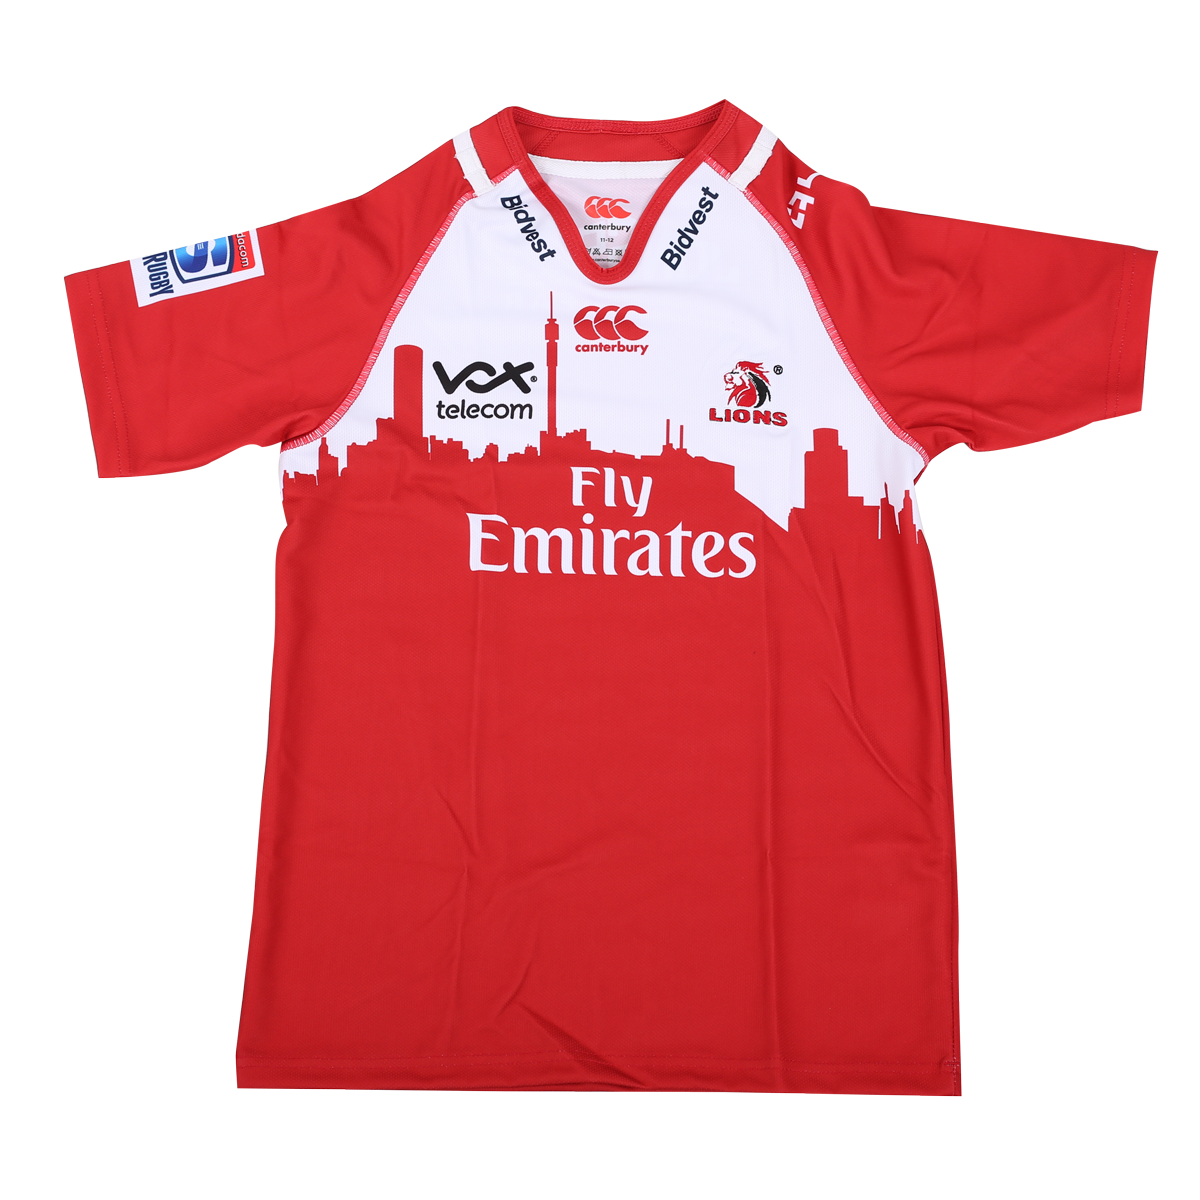 children's lions rugby shirts